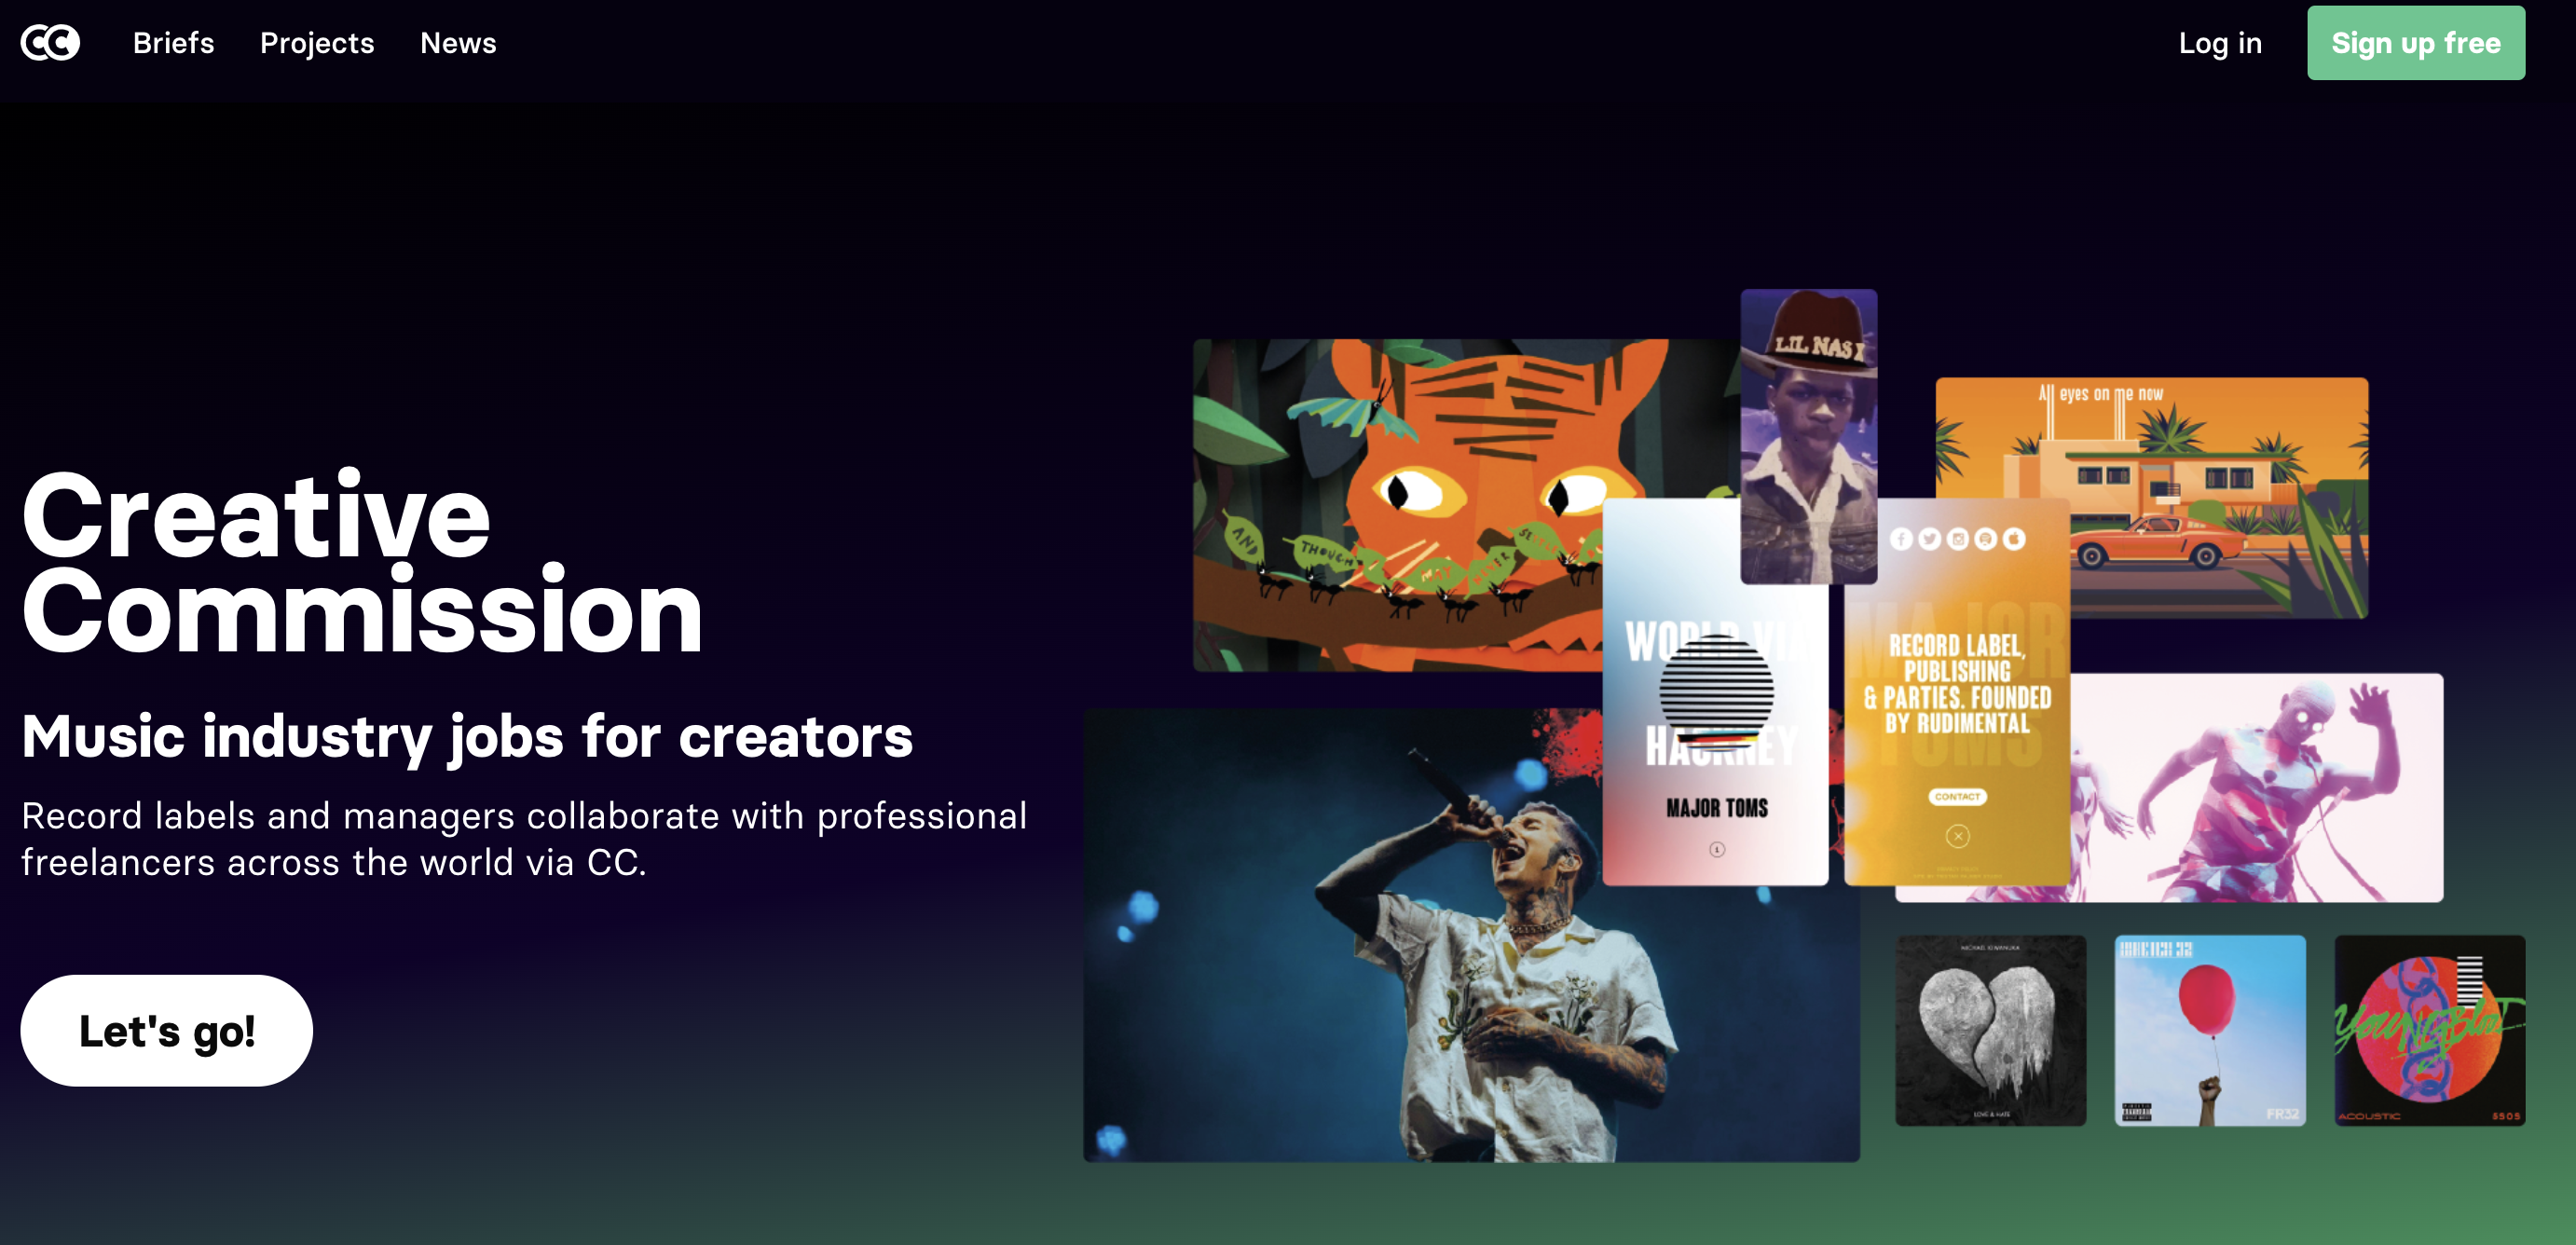 screenshot of the homepage of creative commission, showcasing artwork and photographs related to the music industry, with a call-to-action button for users to get paid to write song lyrics.